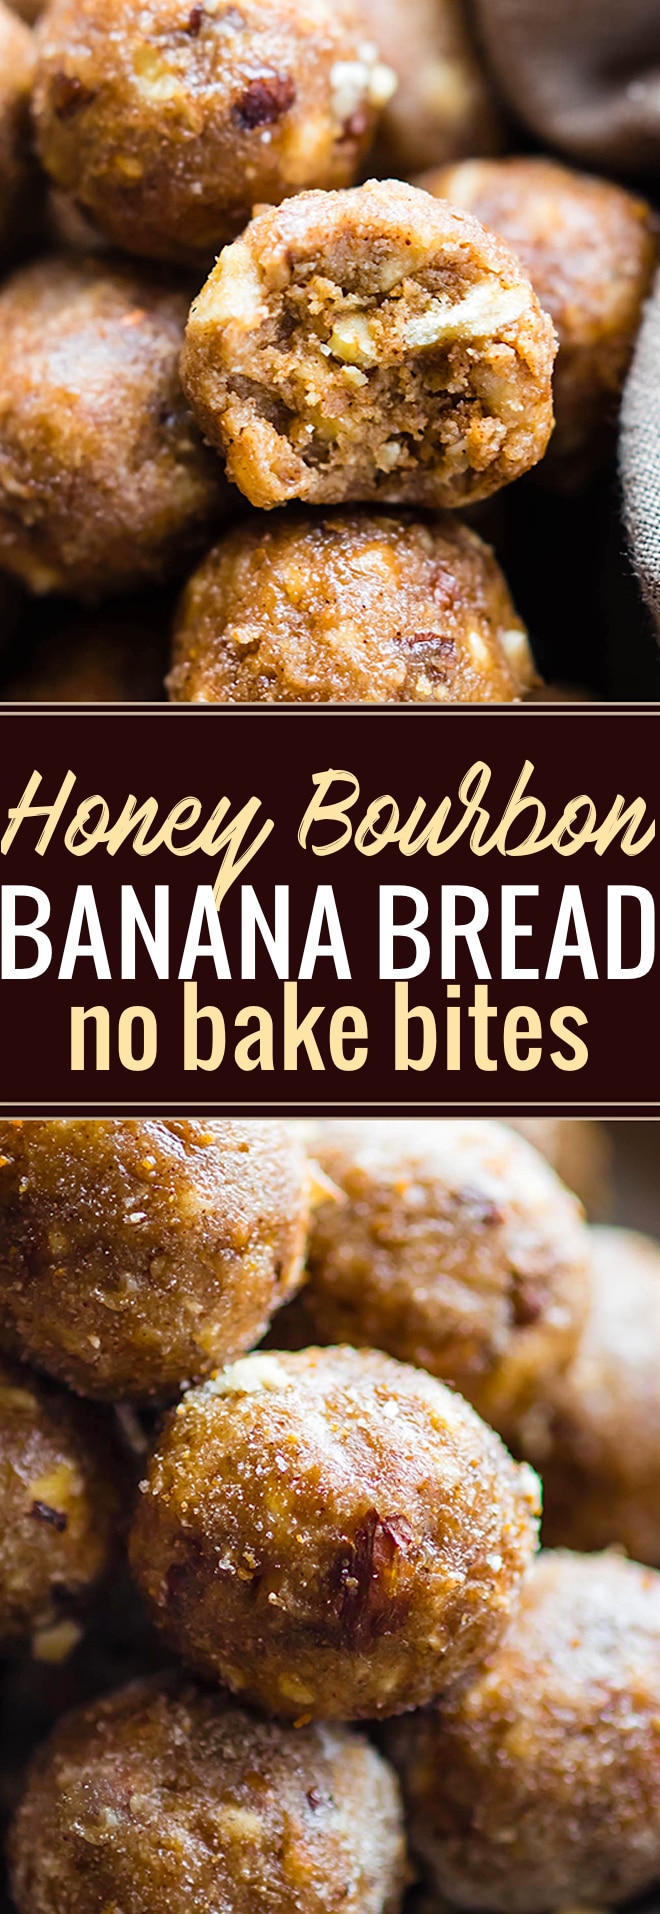 These Honey Bourbon Banana Bread bites make a delicious quick no bake dessert! A gluten free Bourbon Banana bread bites recipe with a little "spike" and seasonal spices. Whip them up for a holiday dessert or tasty snack ready in no time. Dairy free and non alcoholic Vegan option. @cottercrunch